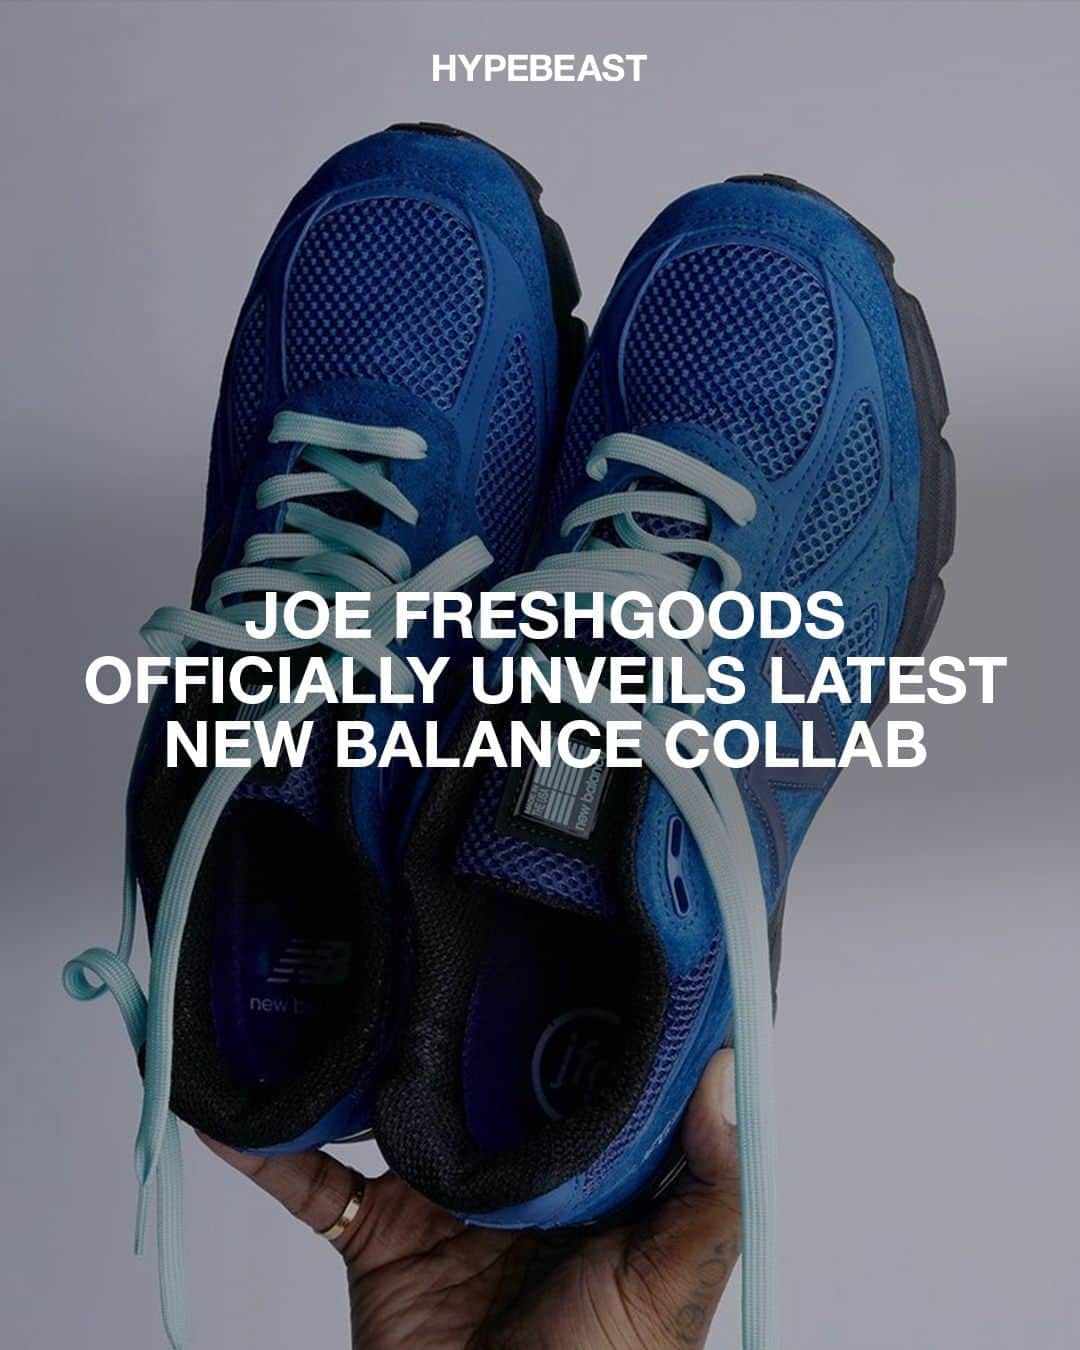 HYPEBEASTのインスタグラム：「@joefreshgoods has officially unveiled his next @newbalance project arriving in the form of three 990v4s inspired by Hype Williams' film "Belly."⁠ ⁠ The three sneakers in the pack are appropriately named "OUTRO" (Black), "INTRO" (White), and "KEISHA BLUE" [aying homage to the 1998 film. Other details include the year hit found at the heel paired with "JFG" branding on the lateral side. ⁠ ⁠ The last slide showcases campaign imagery inspired by an 'XXL' cover from June 1999 which featured Jay Z, DMX, and Ja Rule. The sneakers will be accompanied by apparel to bring together the overall collection.⁠ Photo: Joe Freshgoods」